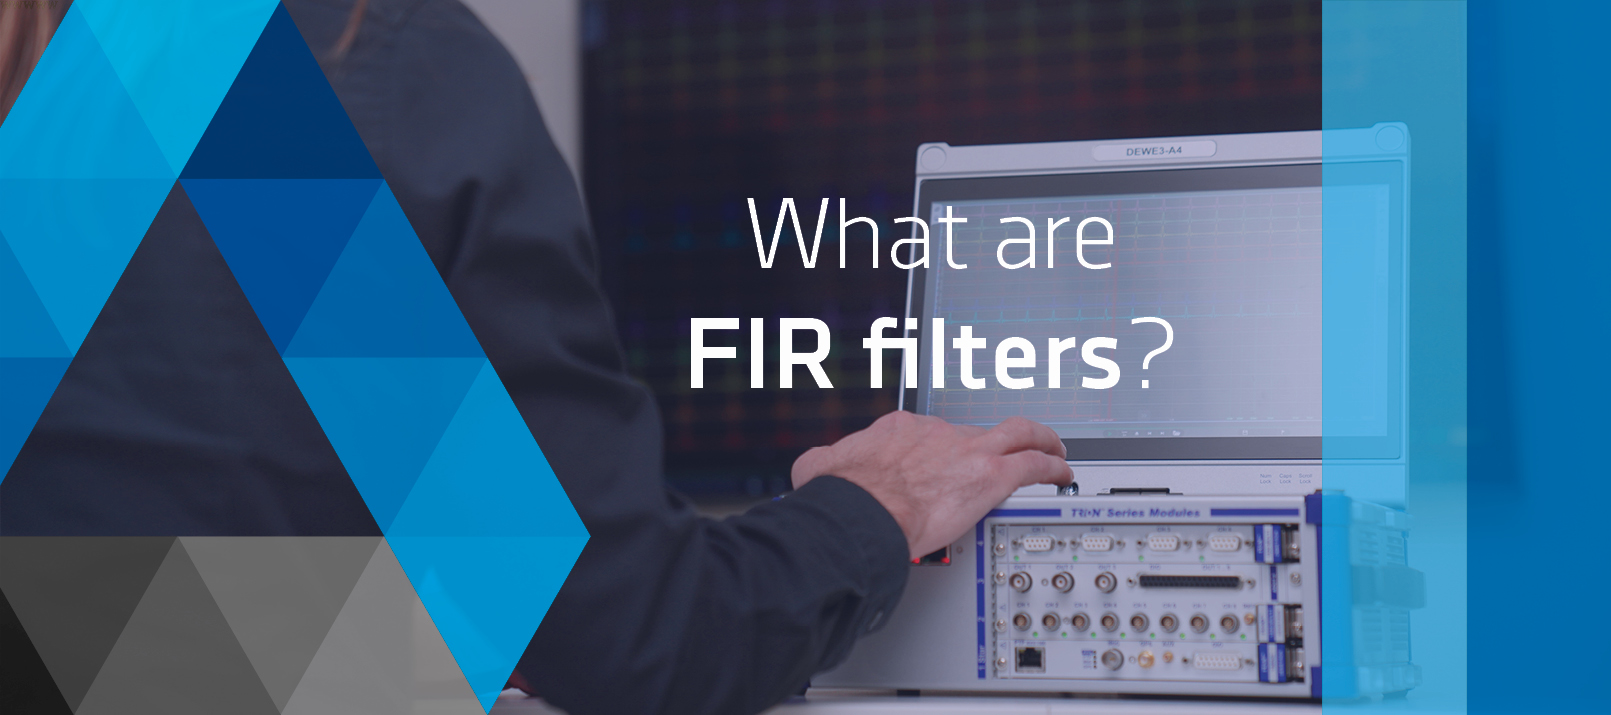 What are FIR filters?